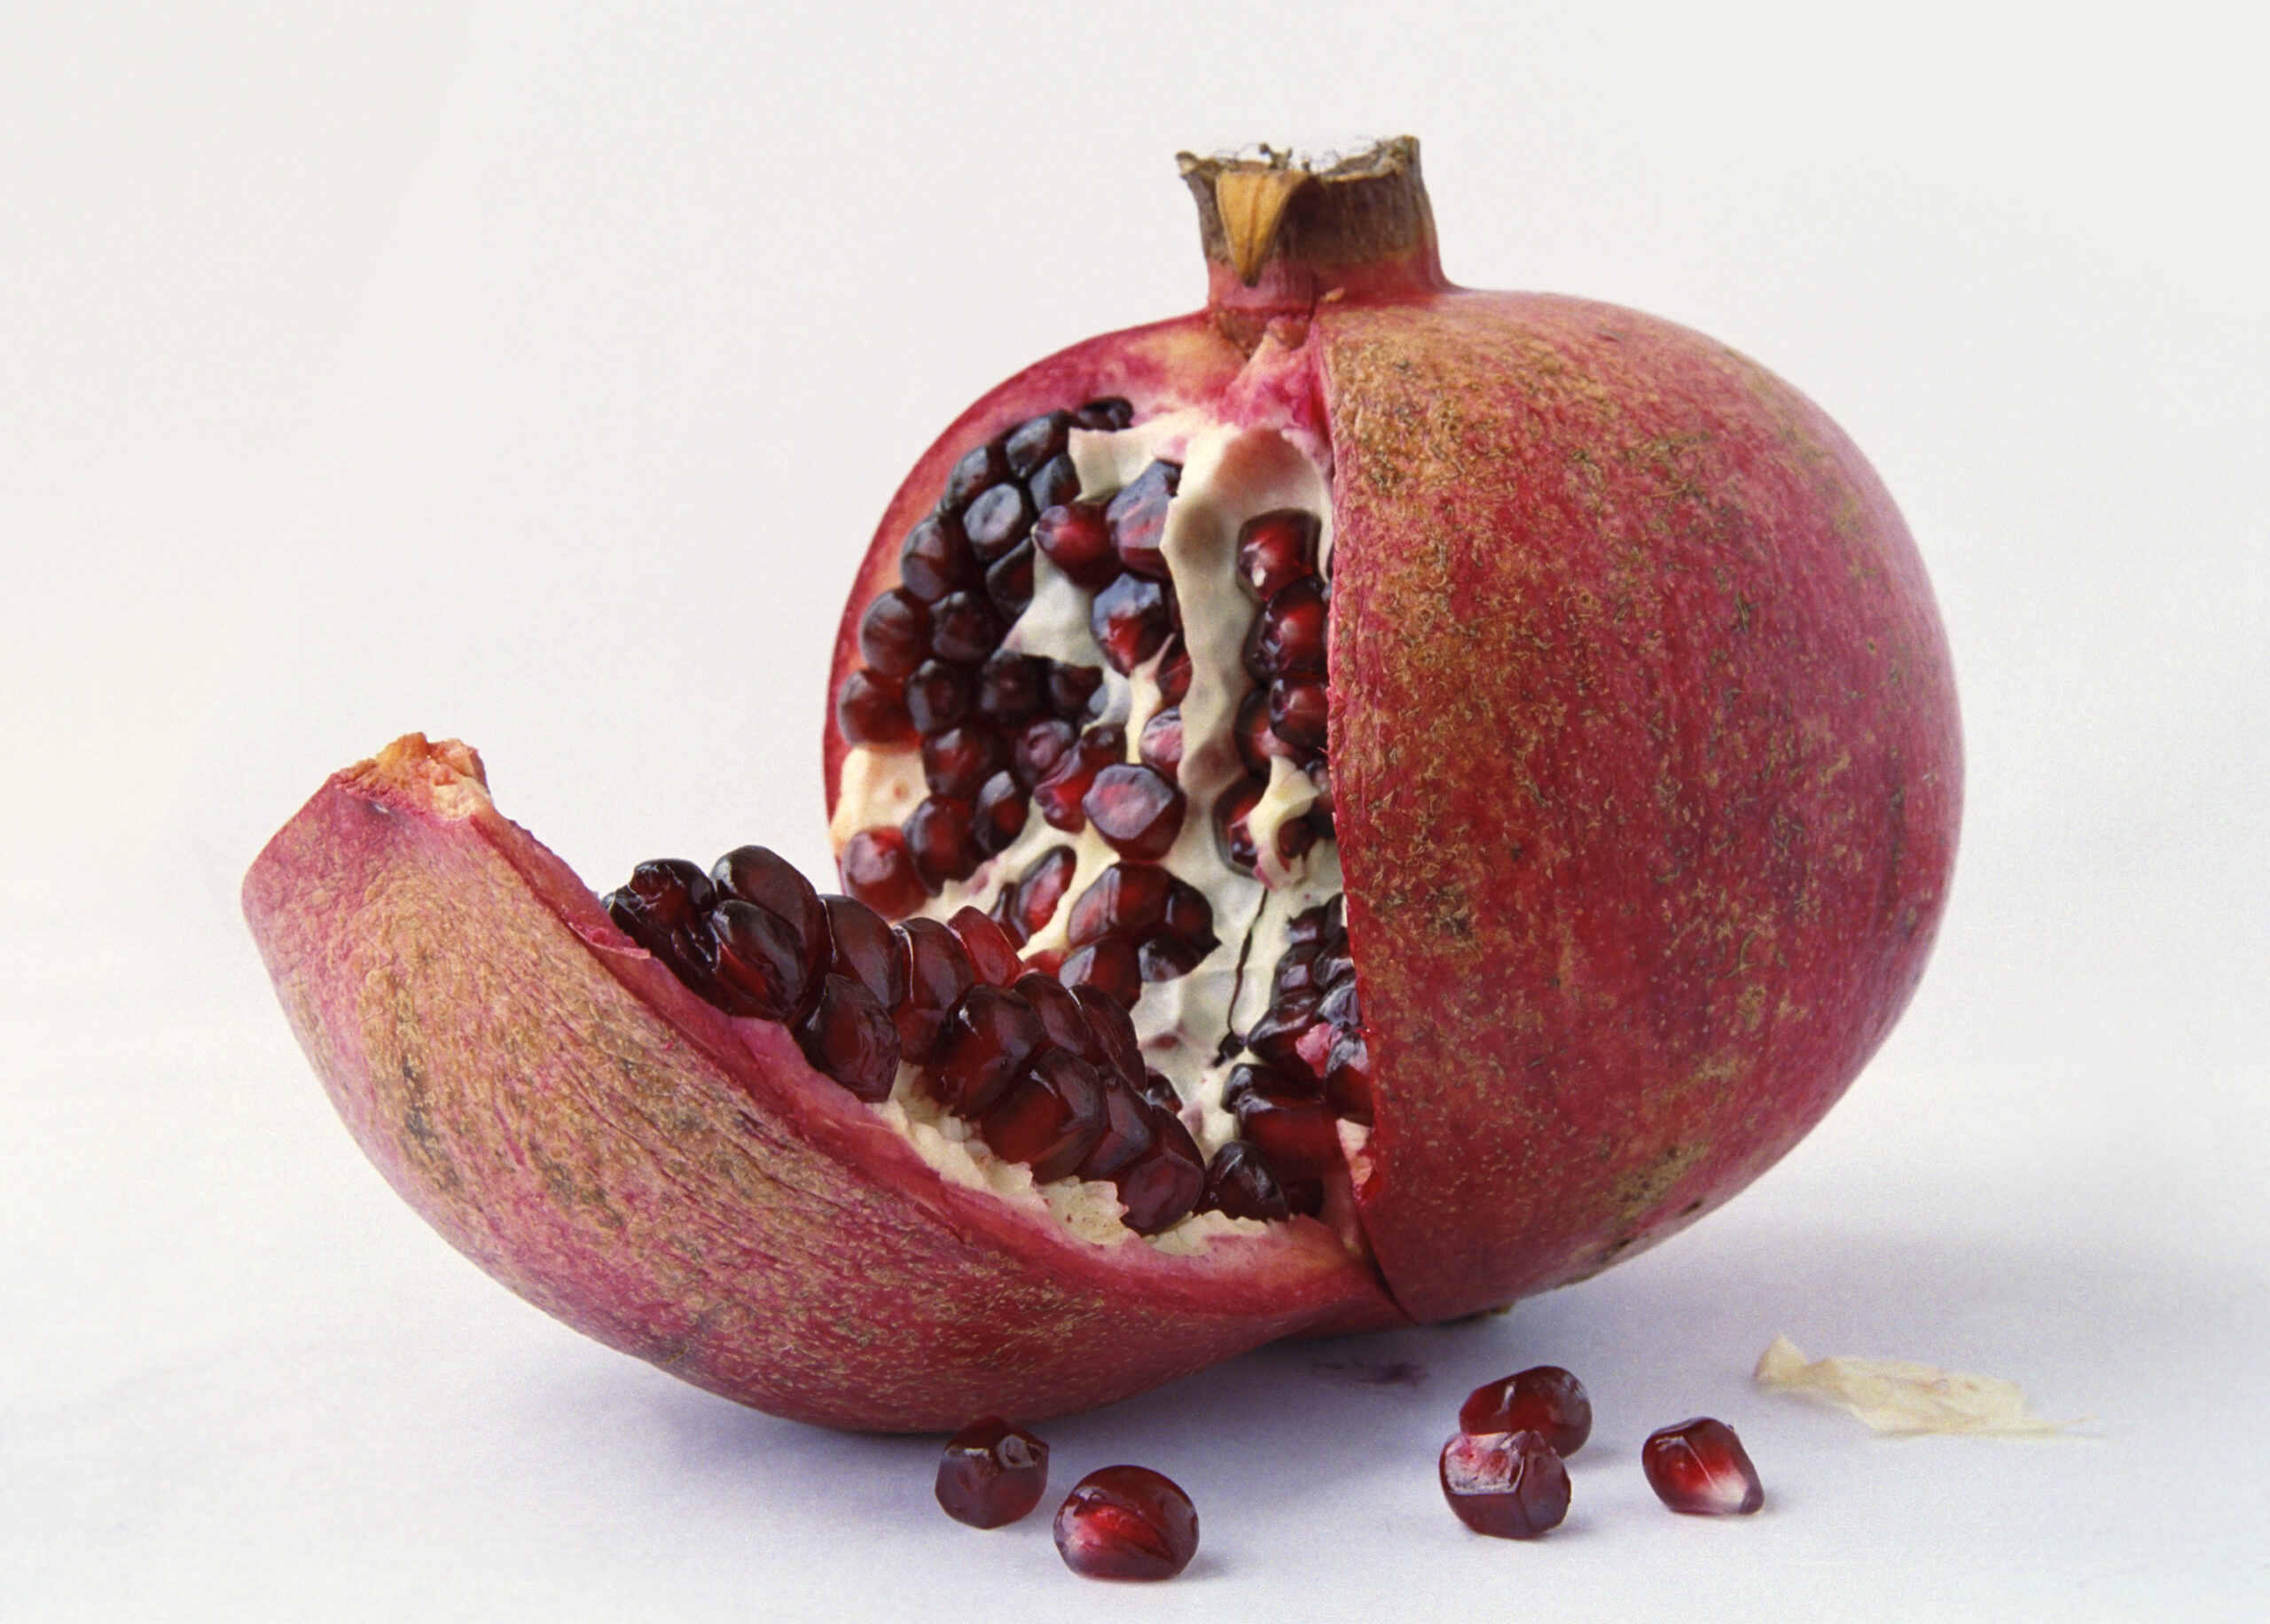 Pomegranate Anti-Aging Compound Passes Human Trial